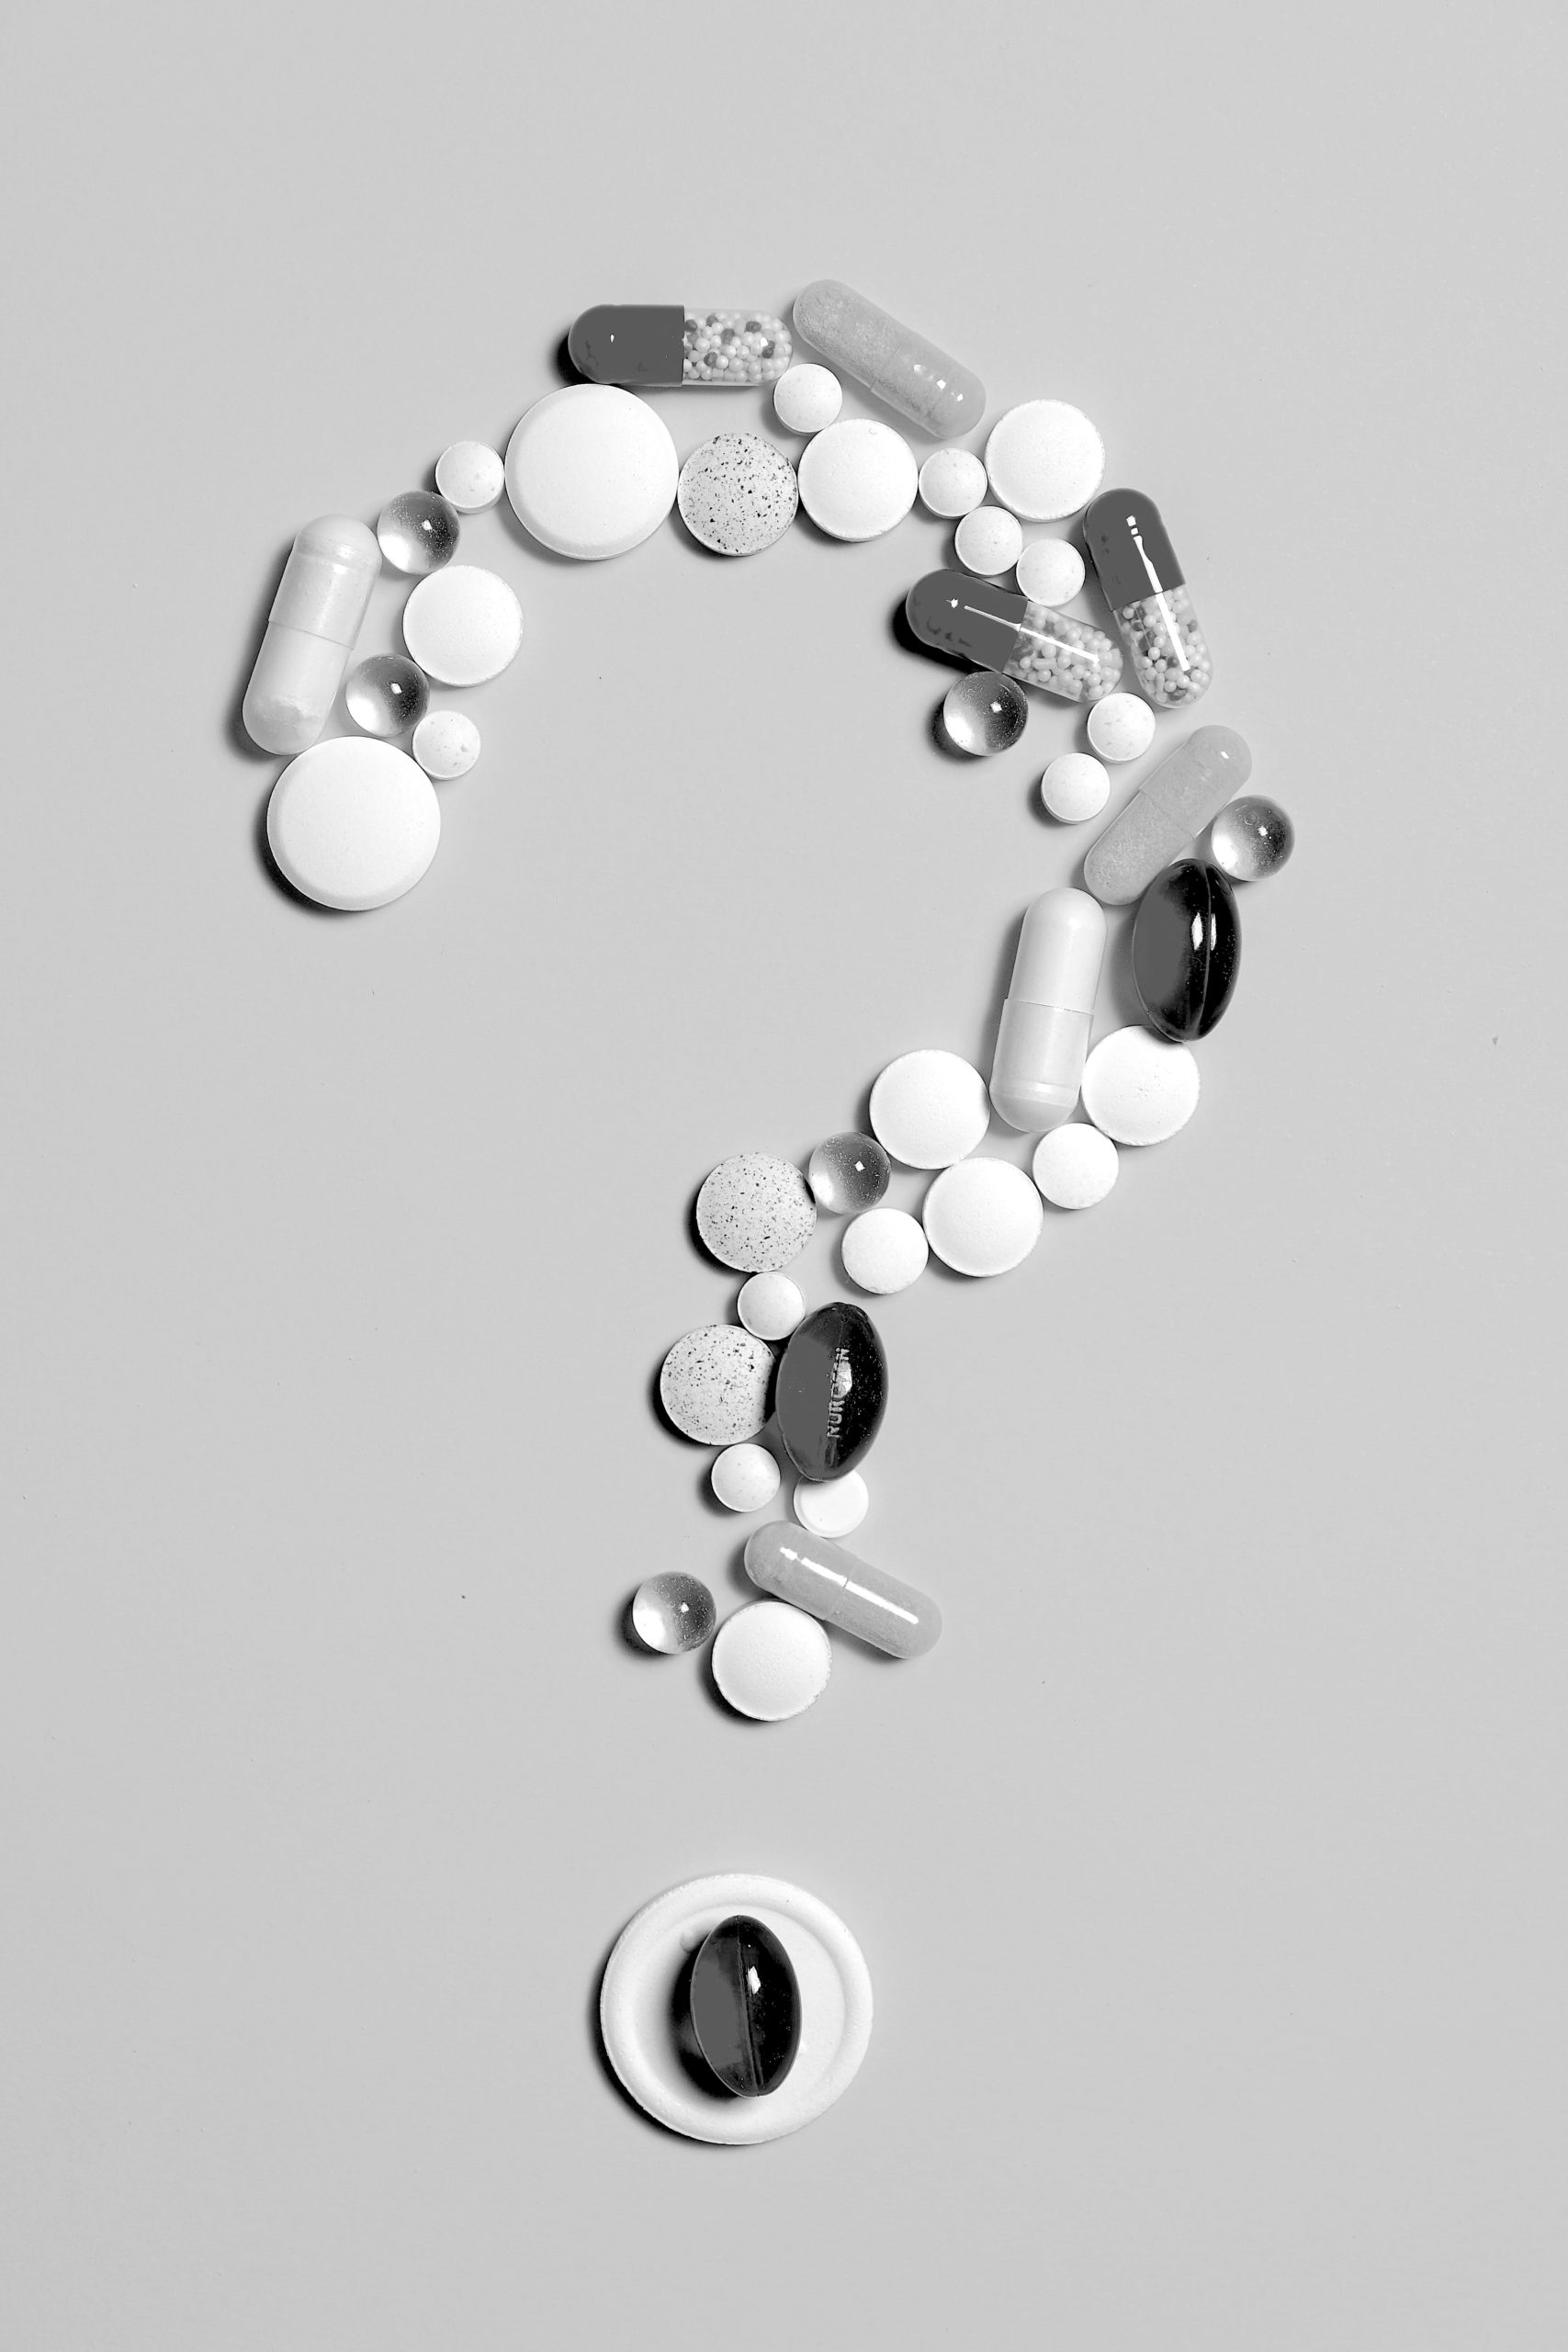 when to take workout supplements arranged in a question mark on a gray background